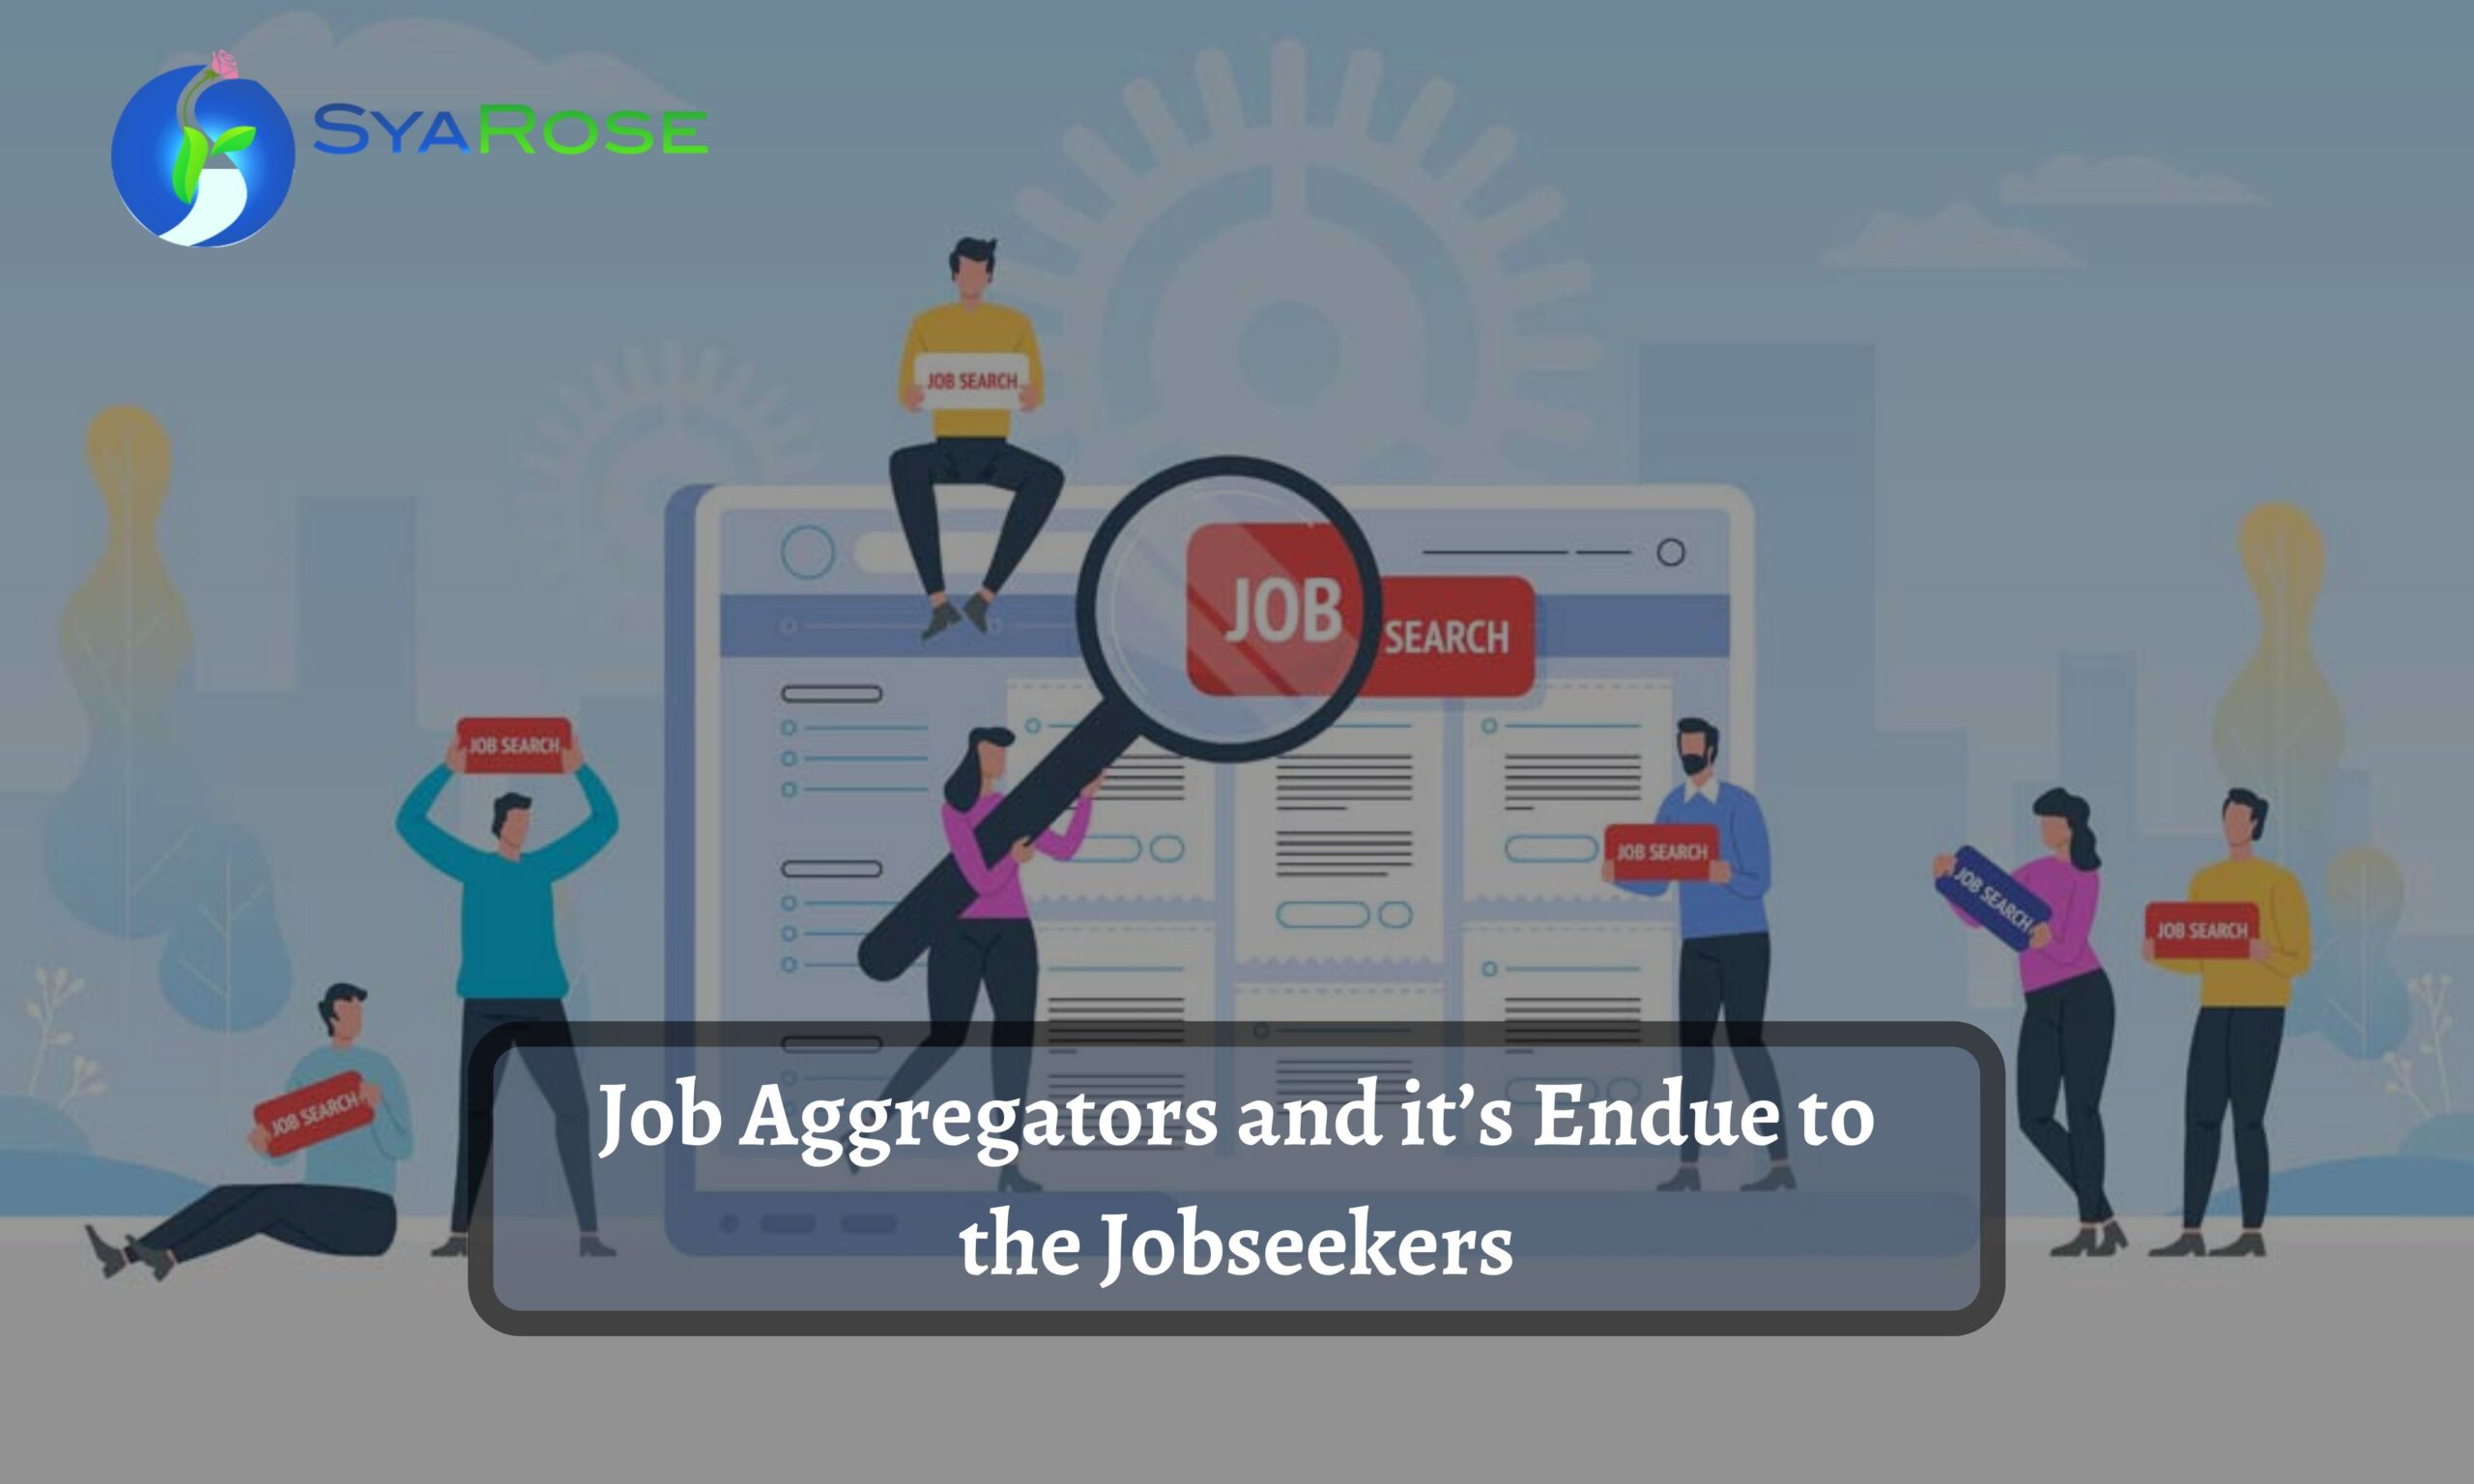 Job Aggregators and it’s Endue to the Jobseekers